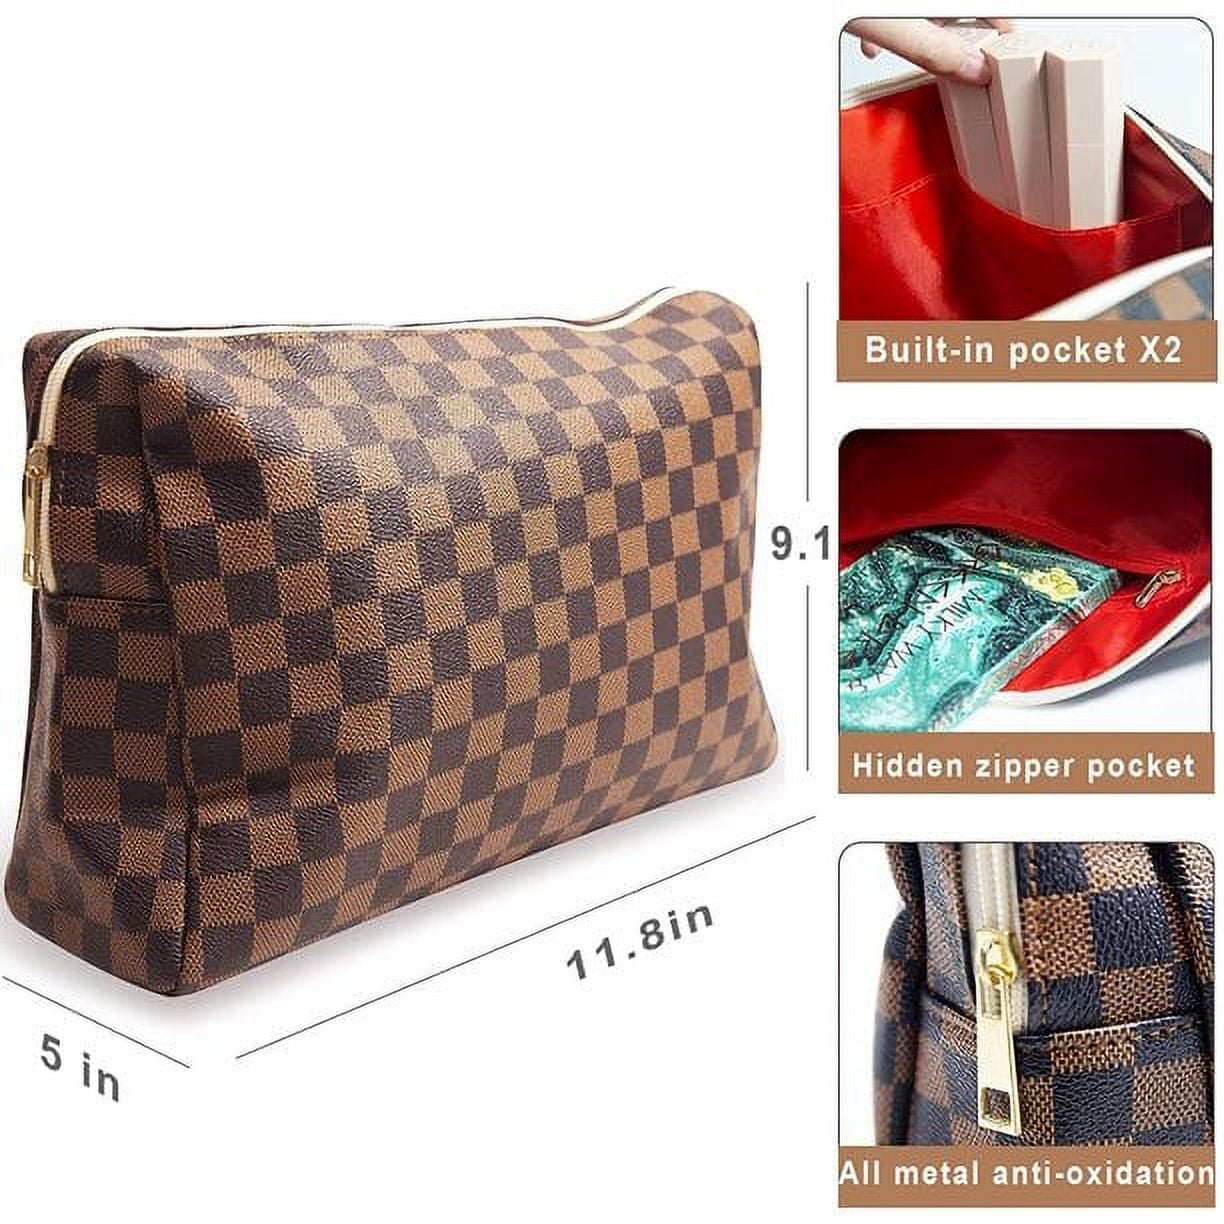 Checkerboard Pattern Makeup Bag, 1pc Large Capacity Contrast Knit Zipper  Toiletries Storage Bag Suitable For Women's Outdoor Travel Black Friday